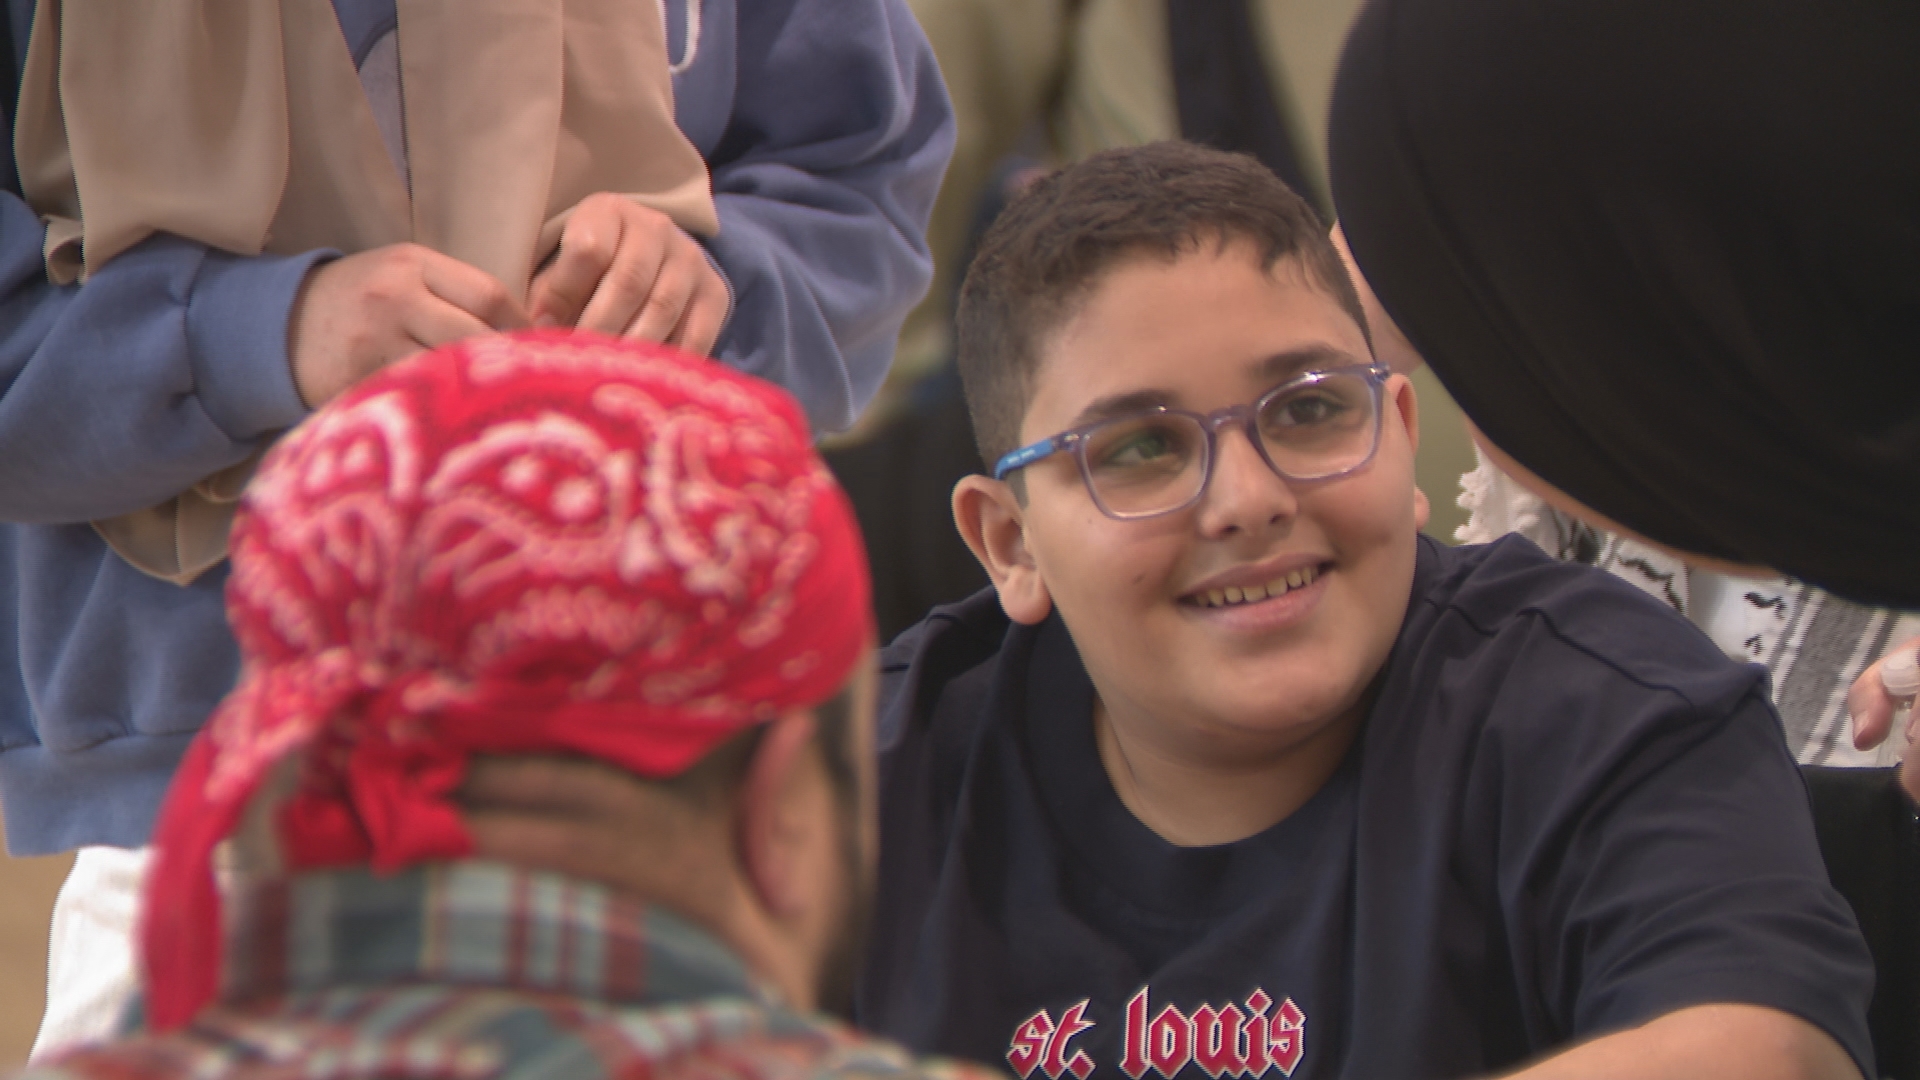 Hadi Zaqout lost his leg in an Israeli missile strike in November. He experienced his first American trivia night Saturday to benefit the nonprofit HEAL Palestine.